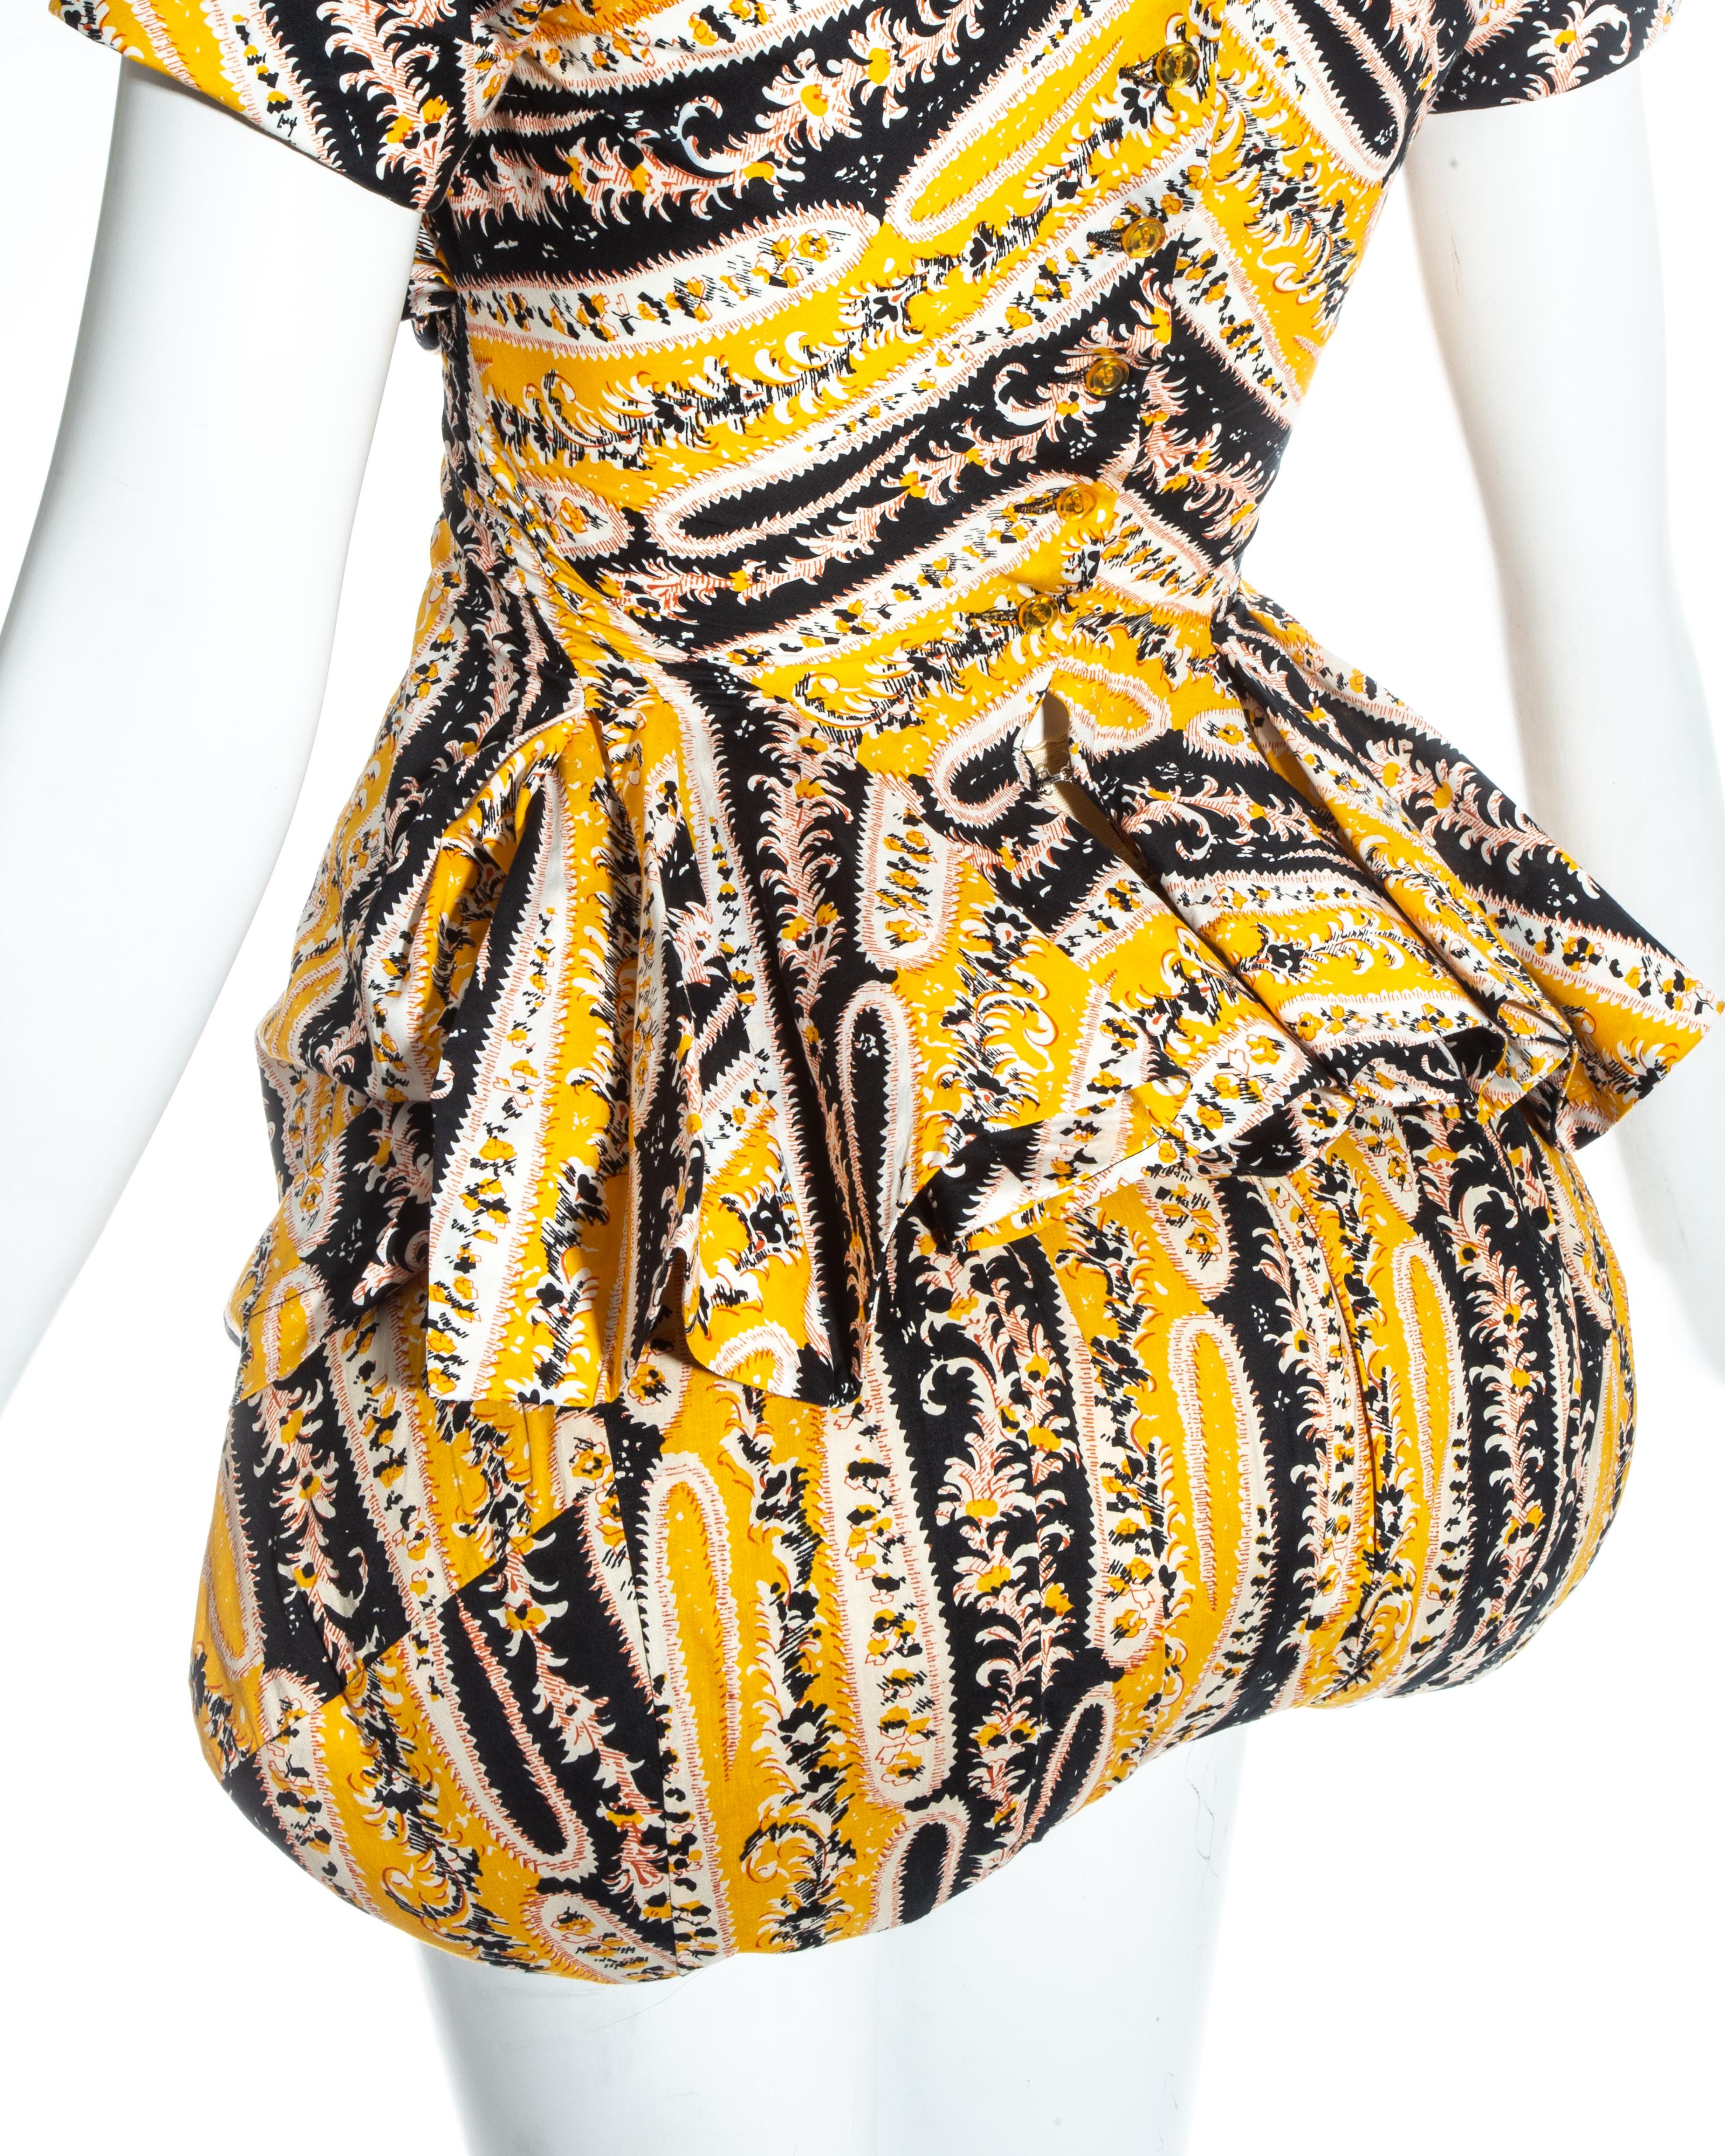 Women's Vivienne Westwood yellow printed cotton mini dress with bustle, ss 1995